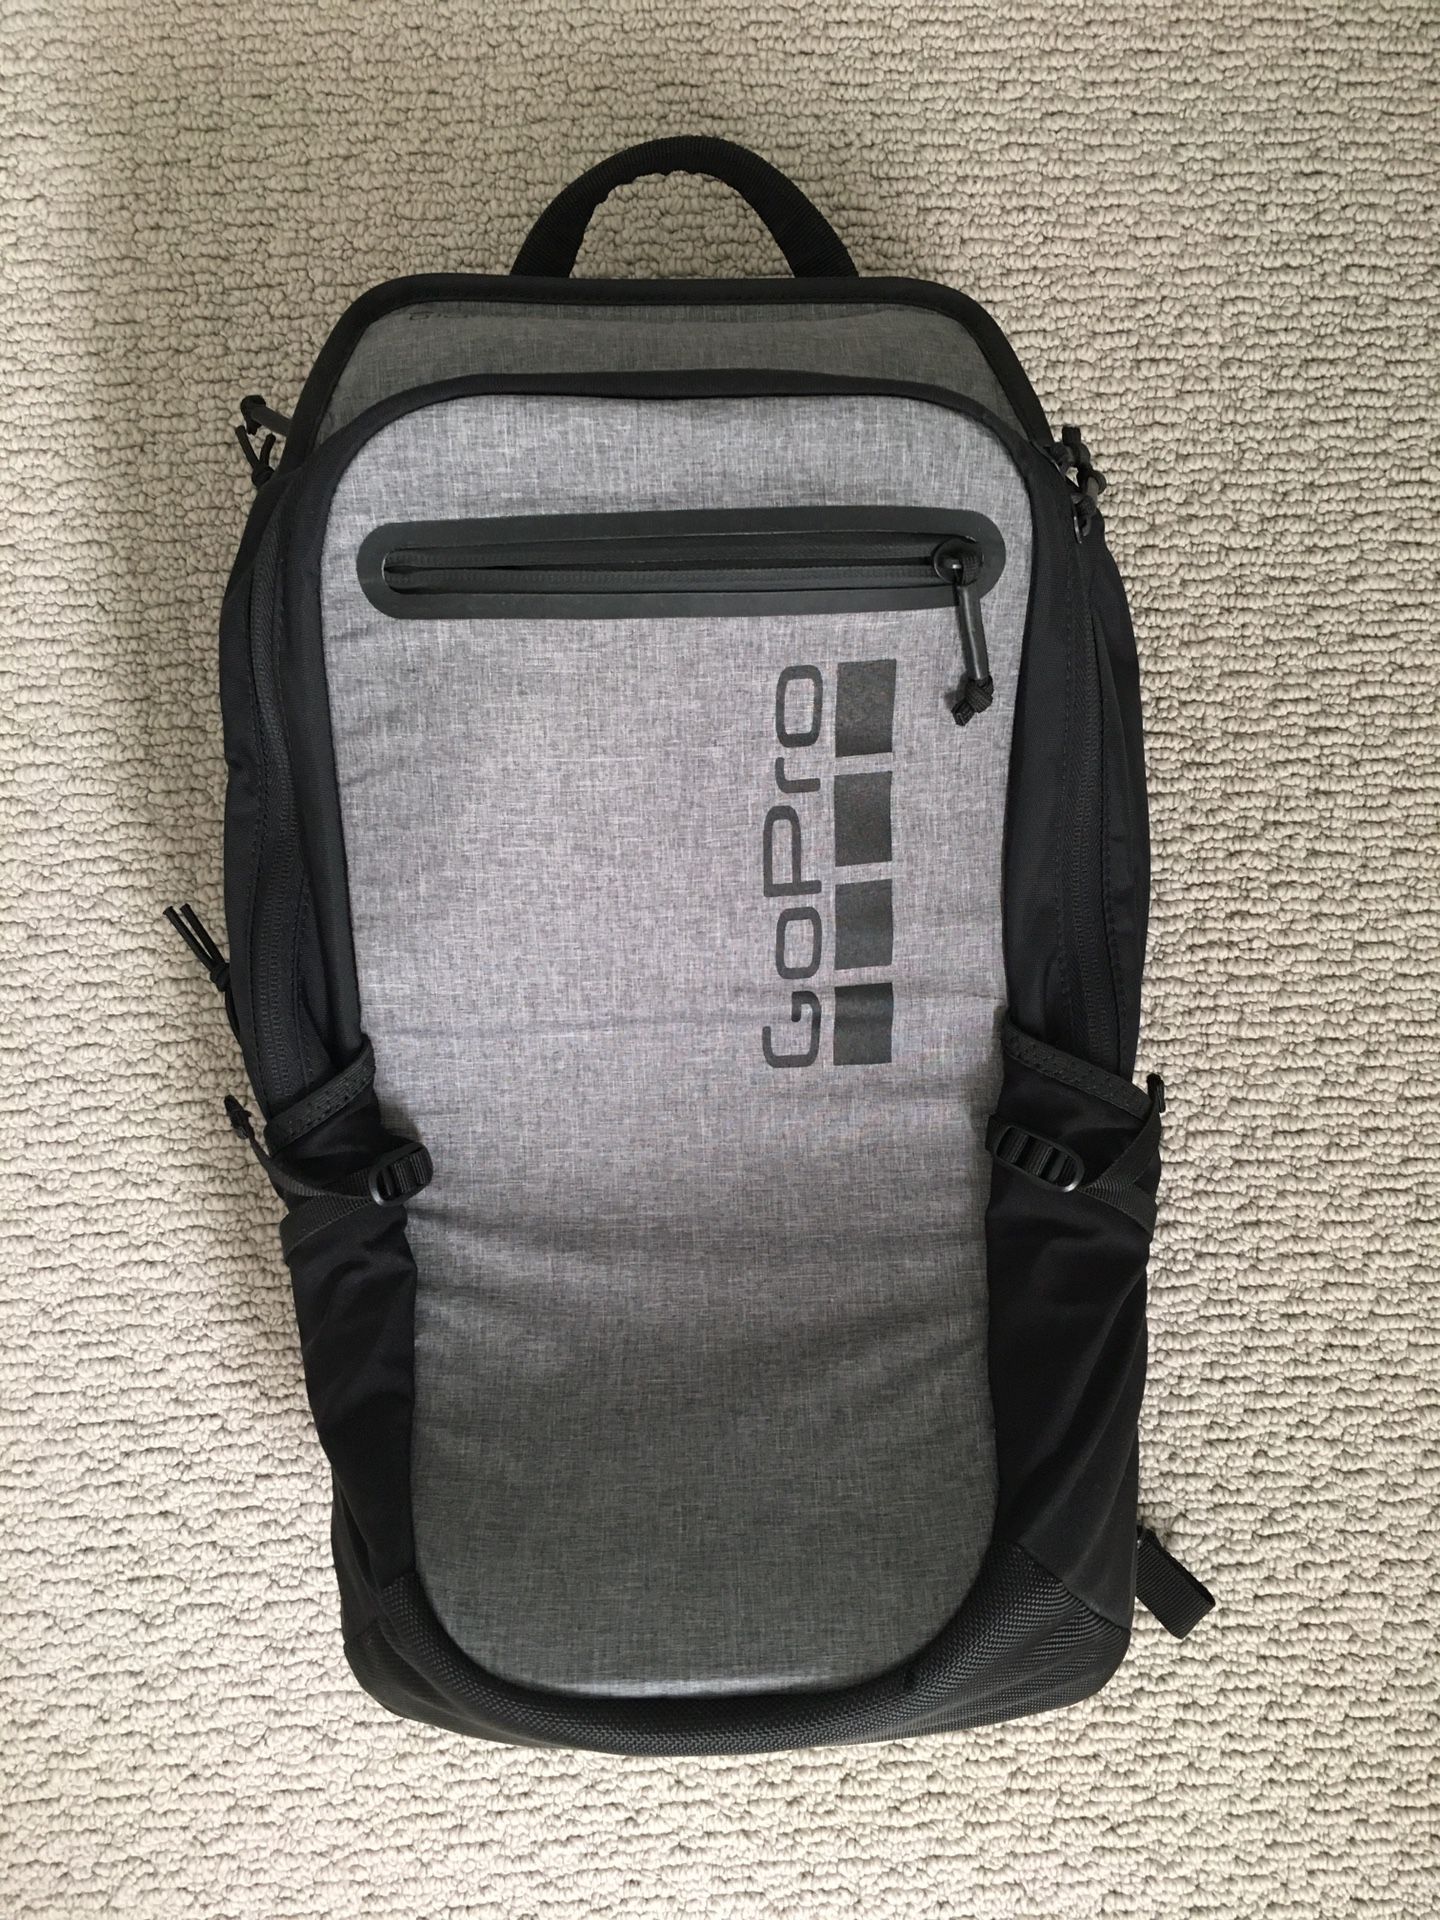 GoPro Seeker Backpack - limited grey edition!